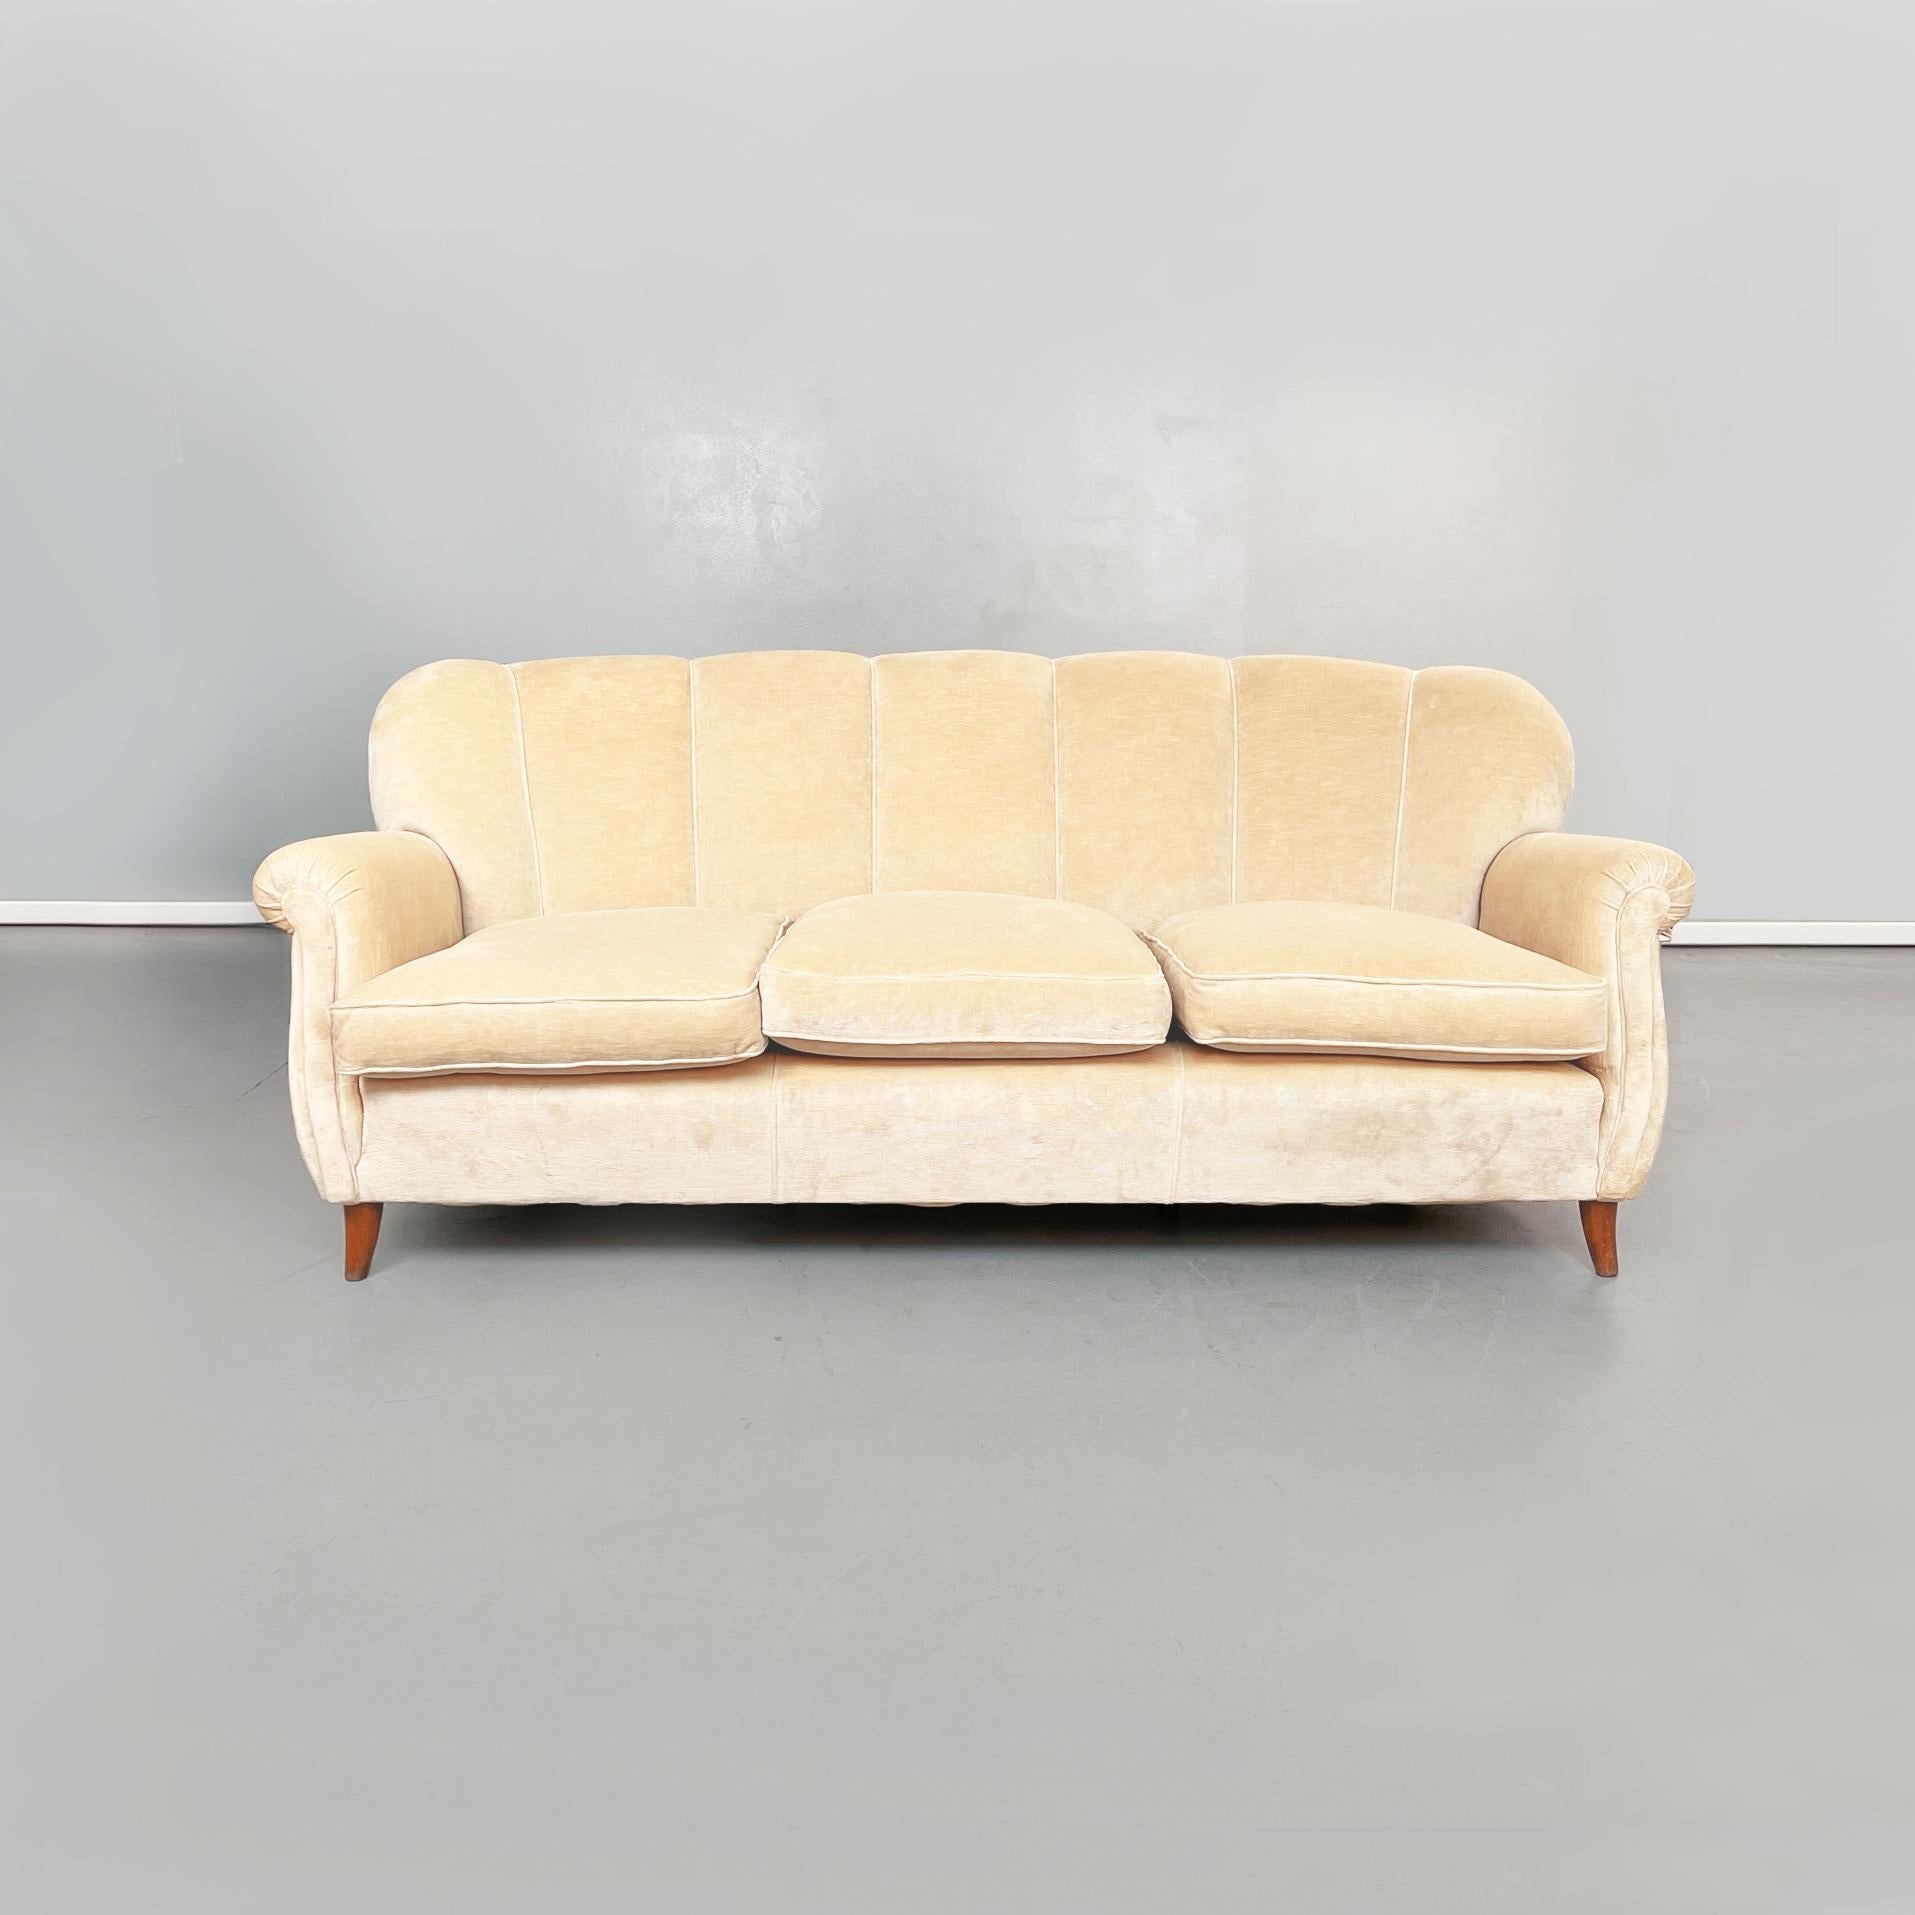 Italian mid-century Wooden sofa in beige fabric, 1960s
A three-seater sofa in beige fabric and wooden structure. The sofa has a seat made up of 3 cushions that follow the shape of the back. The back has several vertical seams that give it a rounded